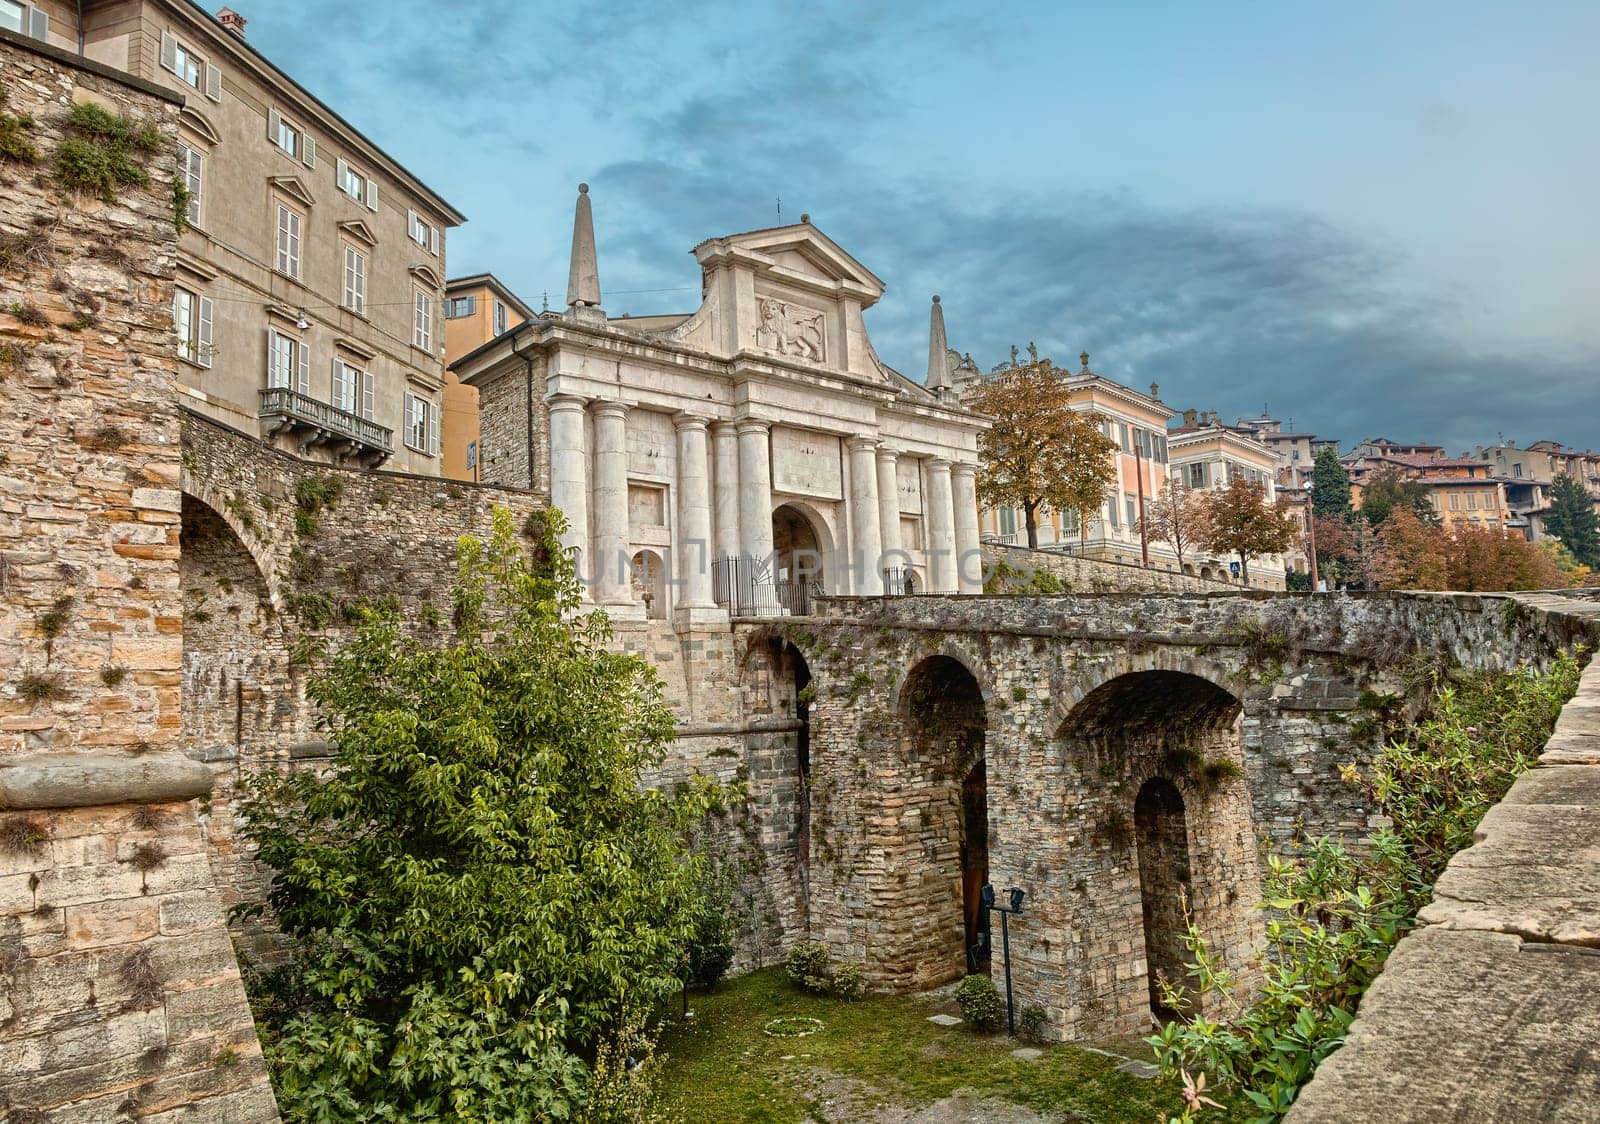 Gateway to the ancient Venetian walls of the medieval town of Bergamo.